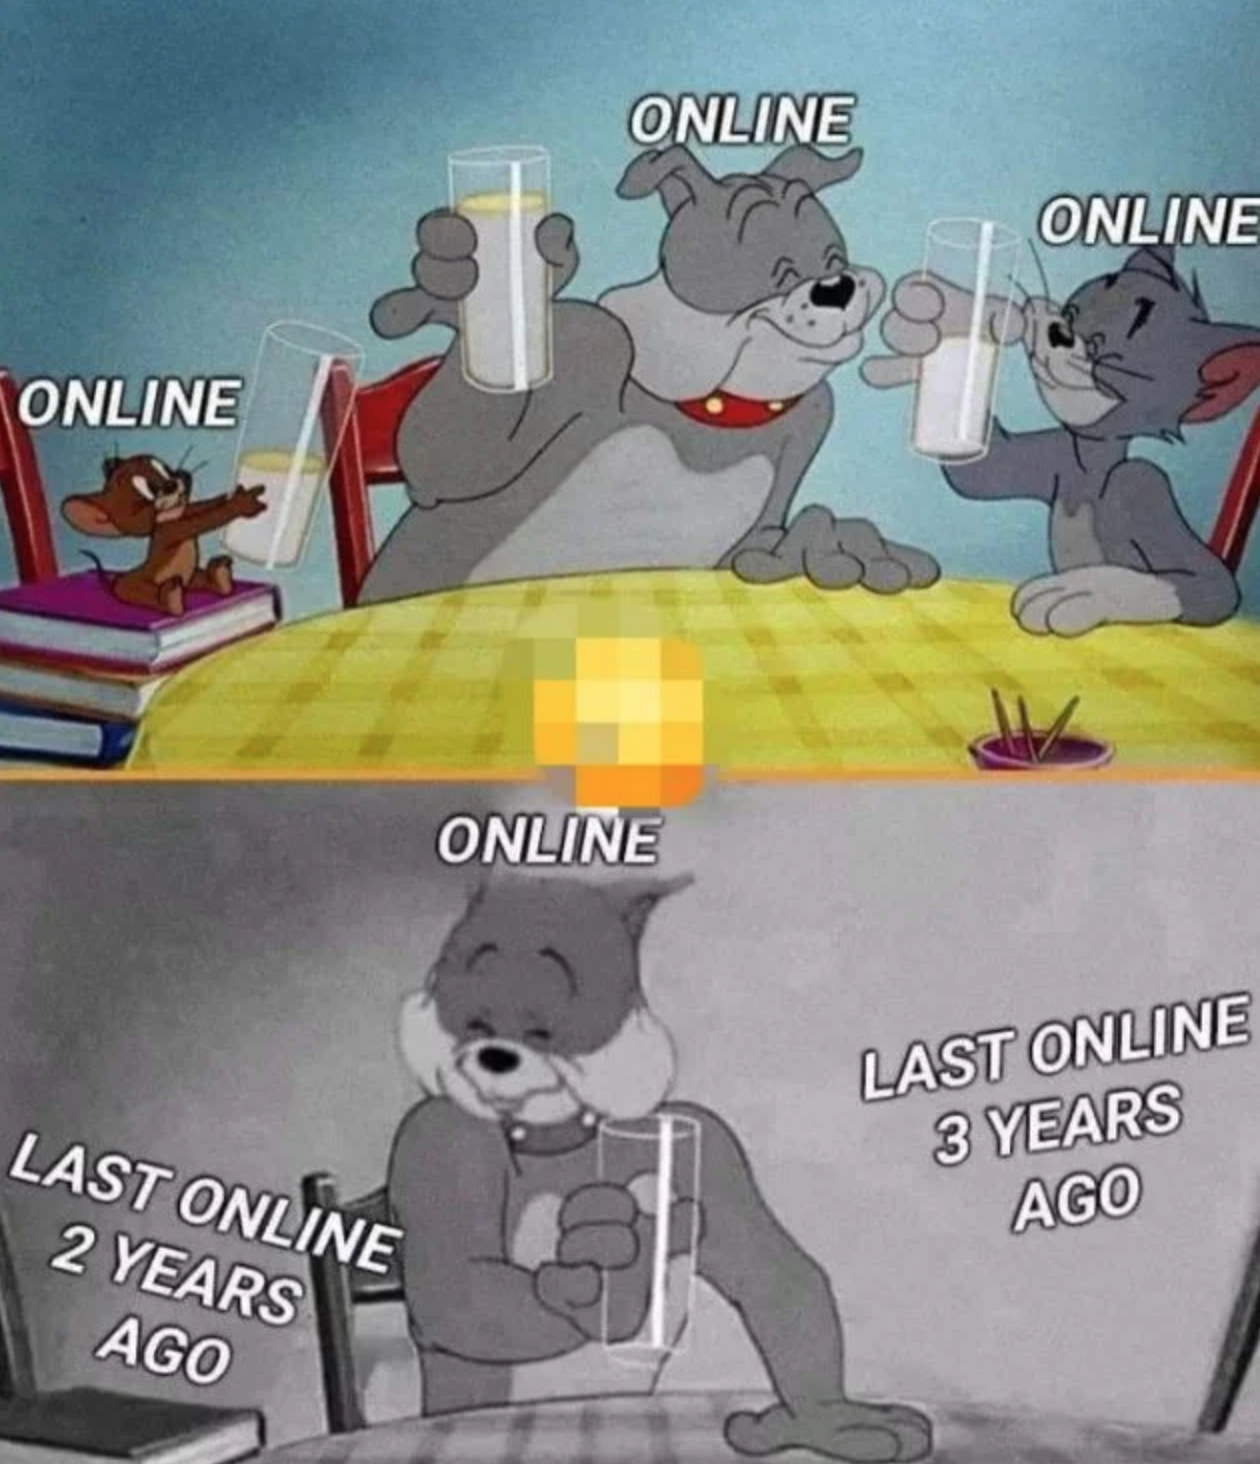 funny gaming memes - online 3 years ago - Online Online Online Online Last Online 2 Years Last Online 3 Years Ago Ago